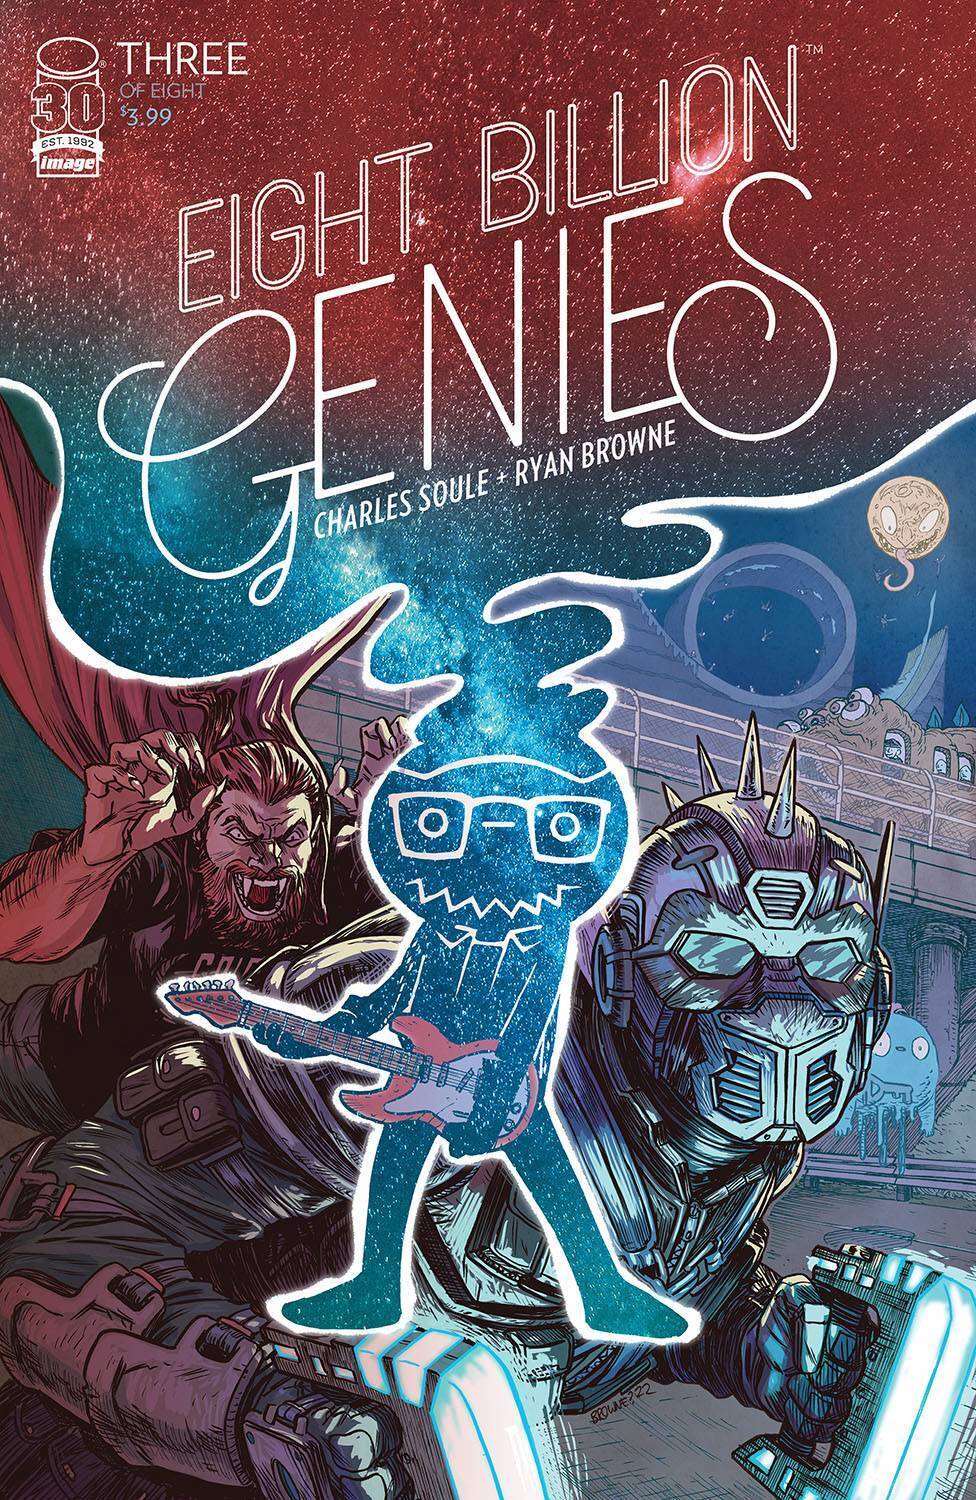 Eight Billion Genies #1-8 | Select Covers | Image NM 2023